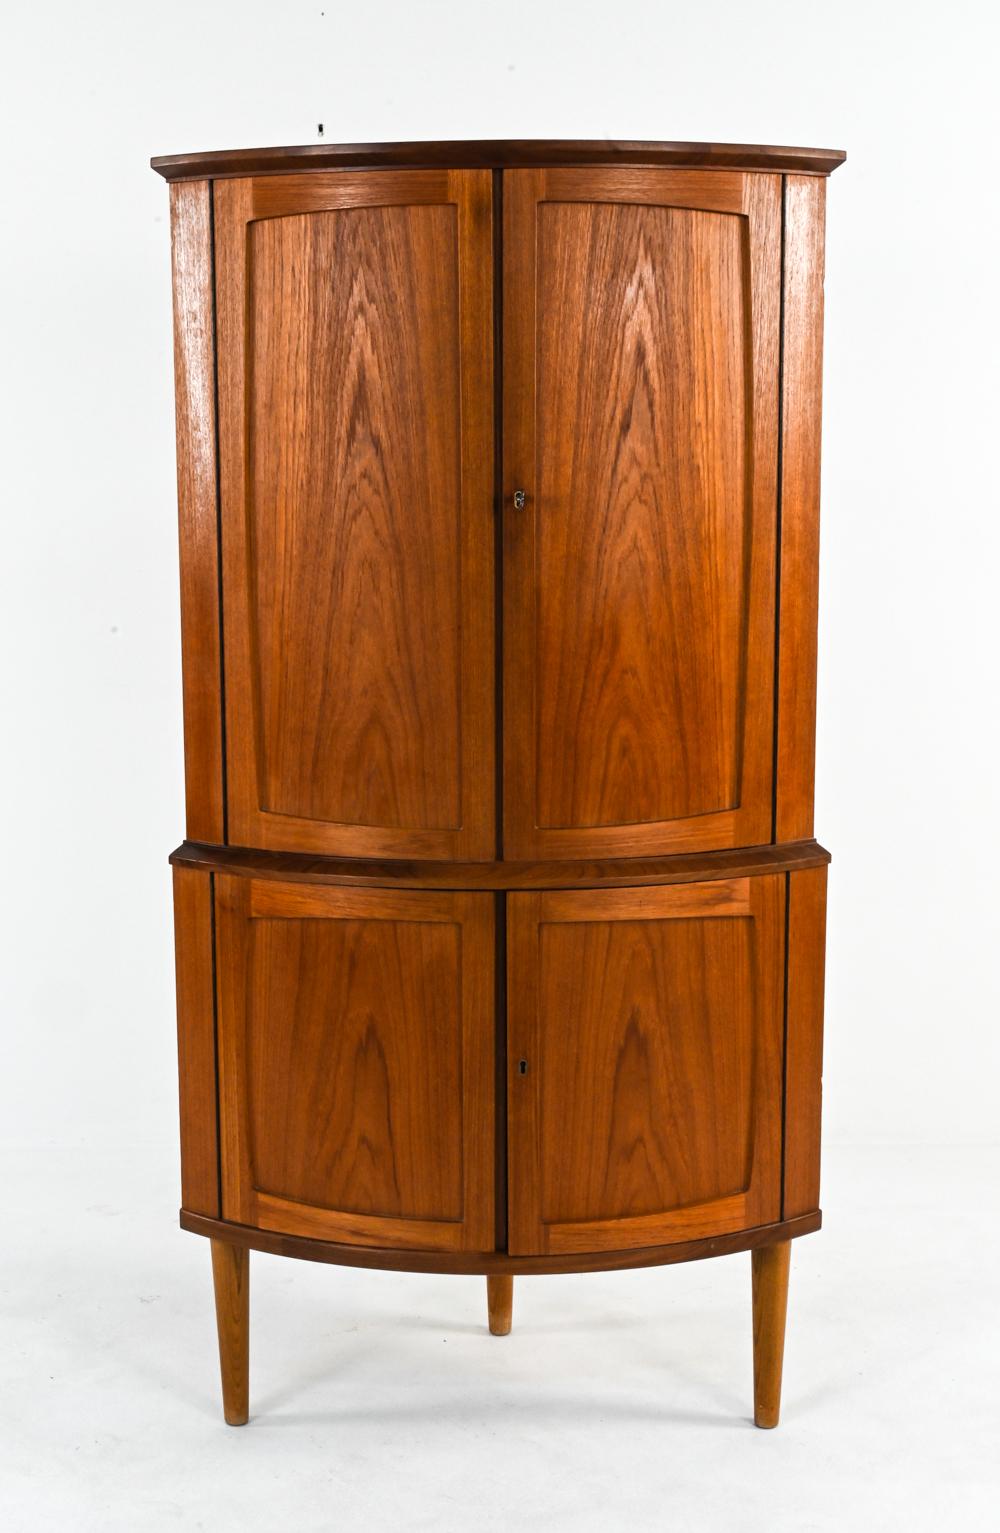 A beautiful Danish mid-century curved front corner cabinet in the manner of S. E. Peterson, c. 1960's. This finely crafted cabinet features quality teak book-matched veneer with an elegant flame-like grain and rich, warm coloration. On sturdy,